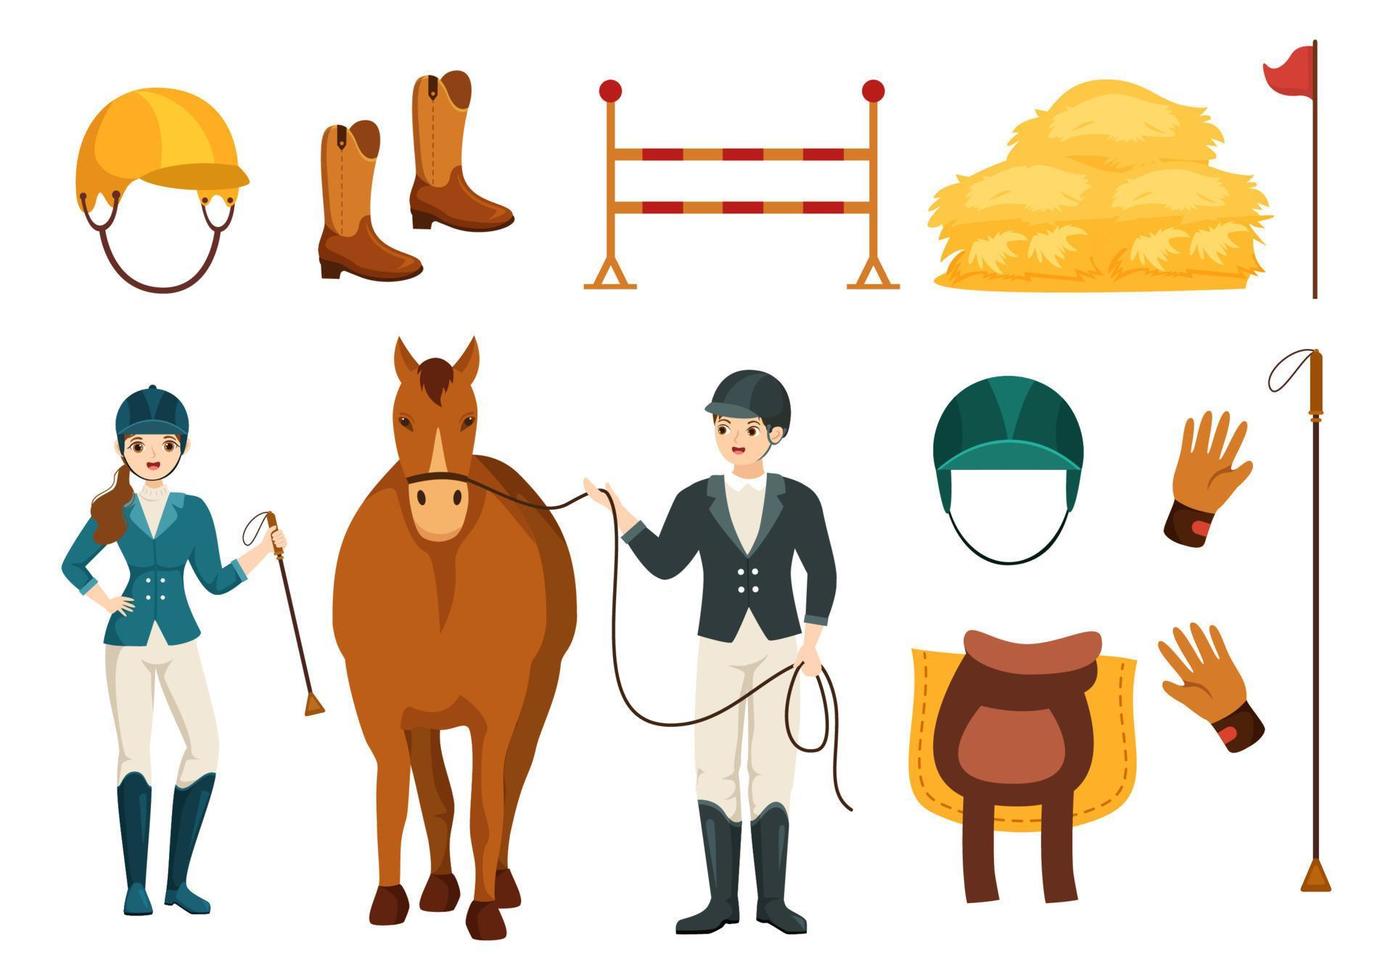 Equestrian Sport Horse Trainer with Training, Riding Lessons and Running Horses in Flat Cartoon Hand Drawn Template Illustration vector